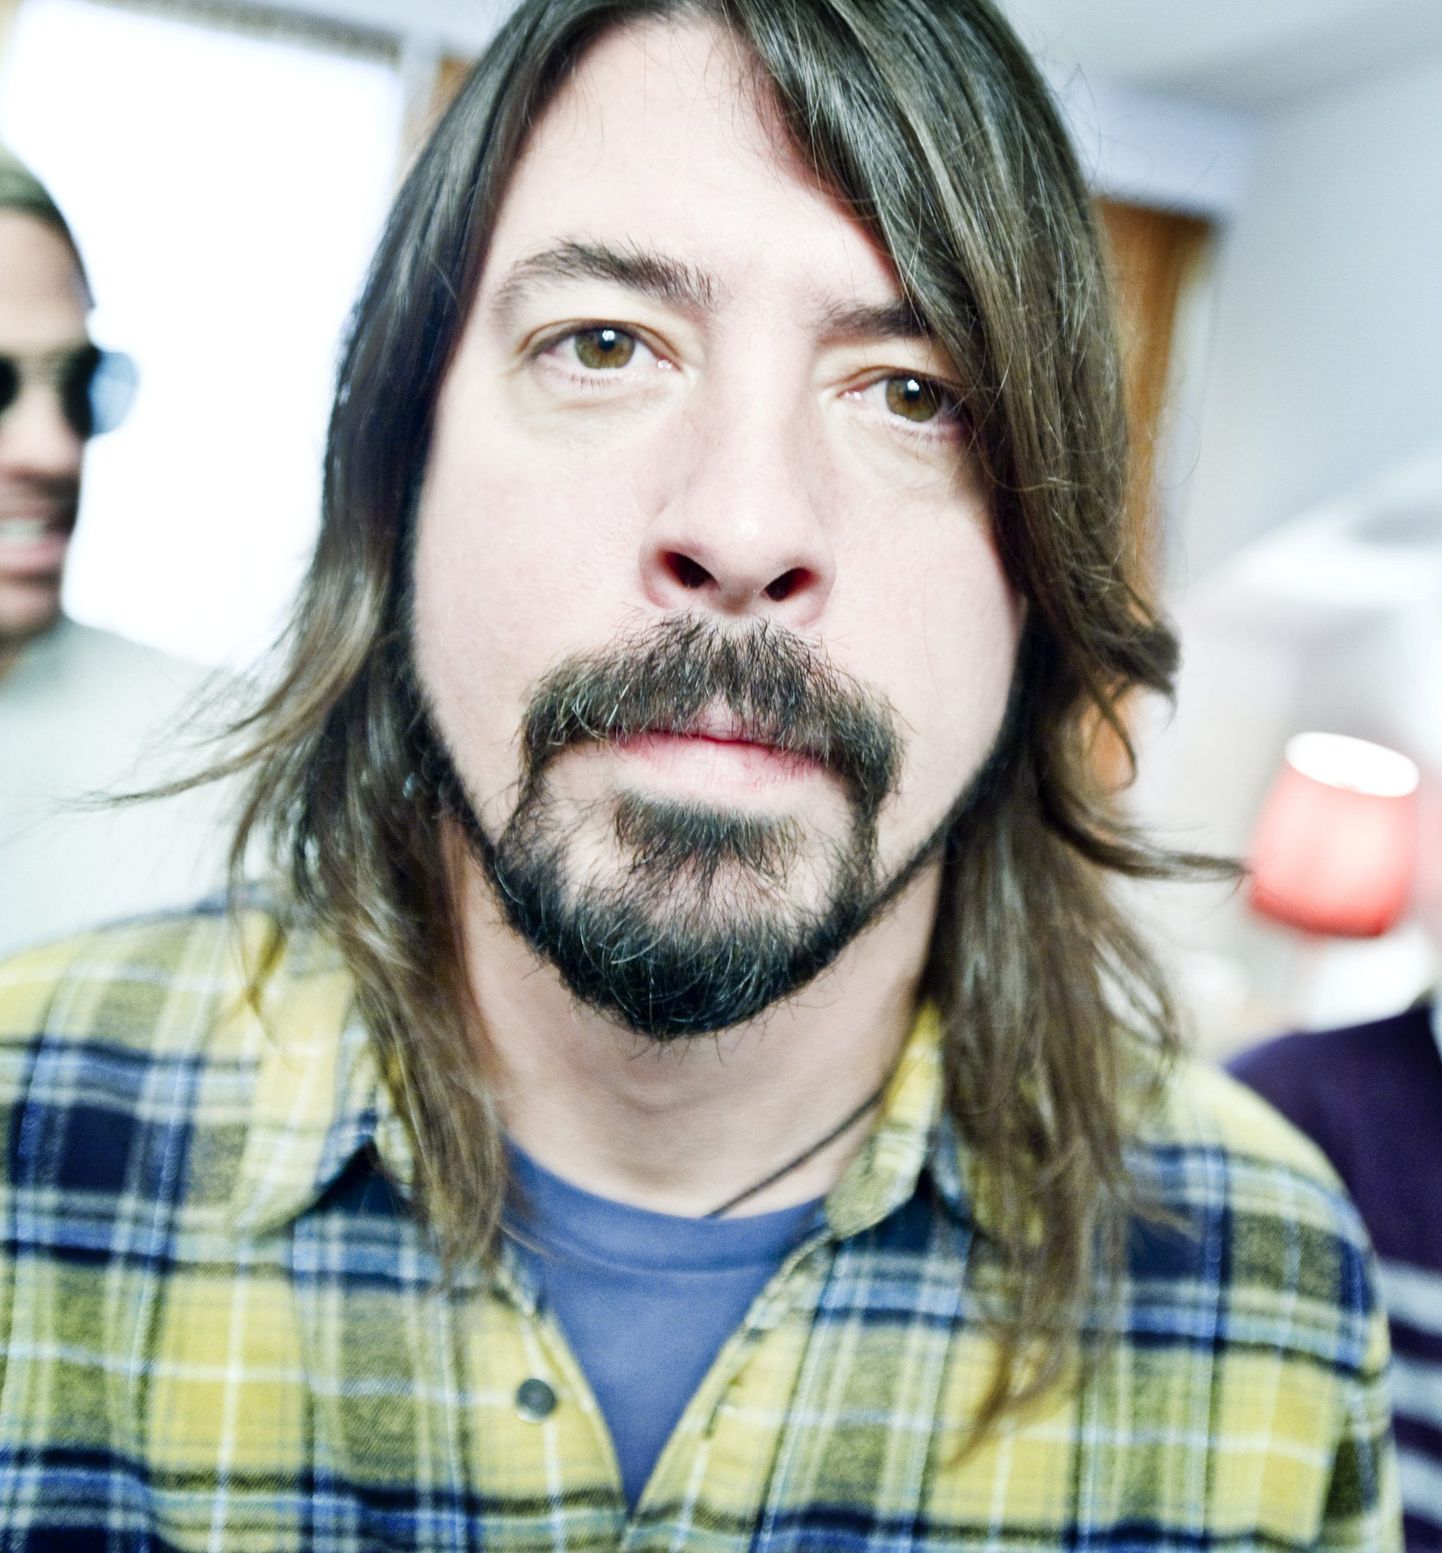 David Eric "Dave" Grohl